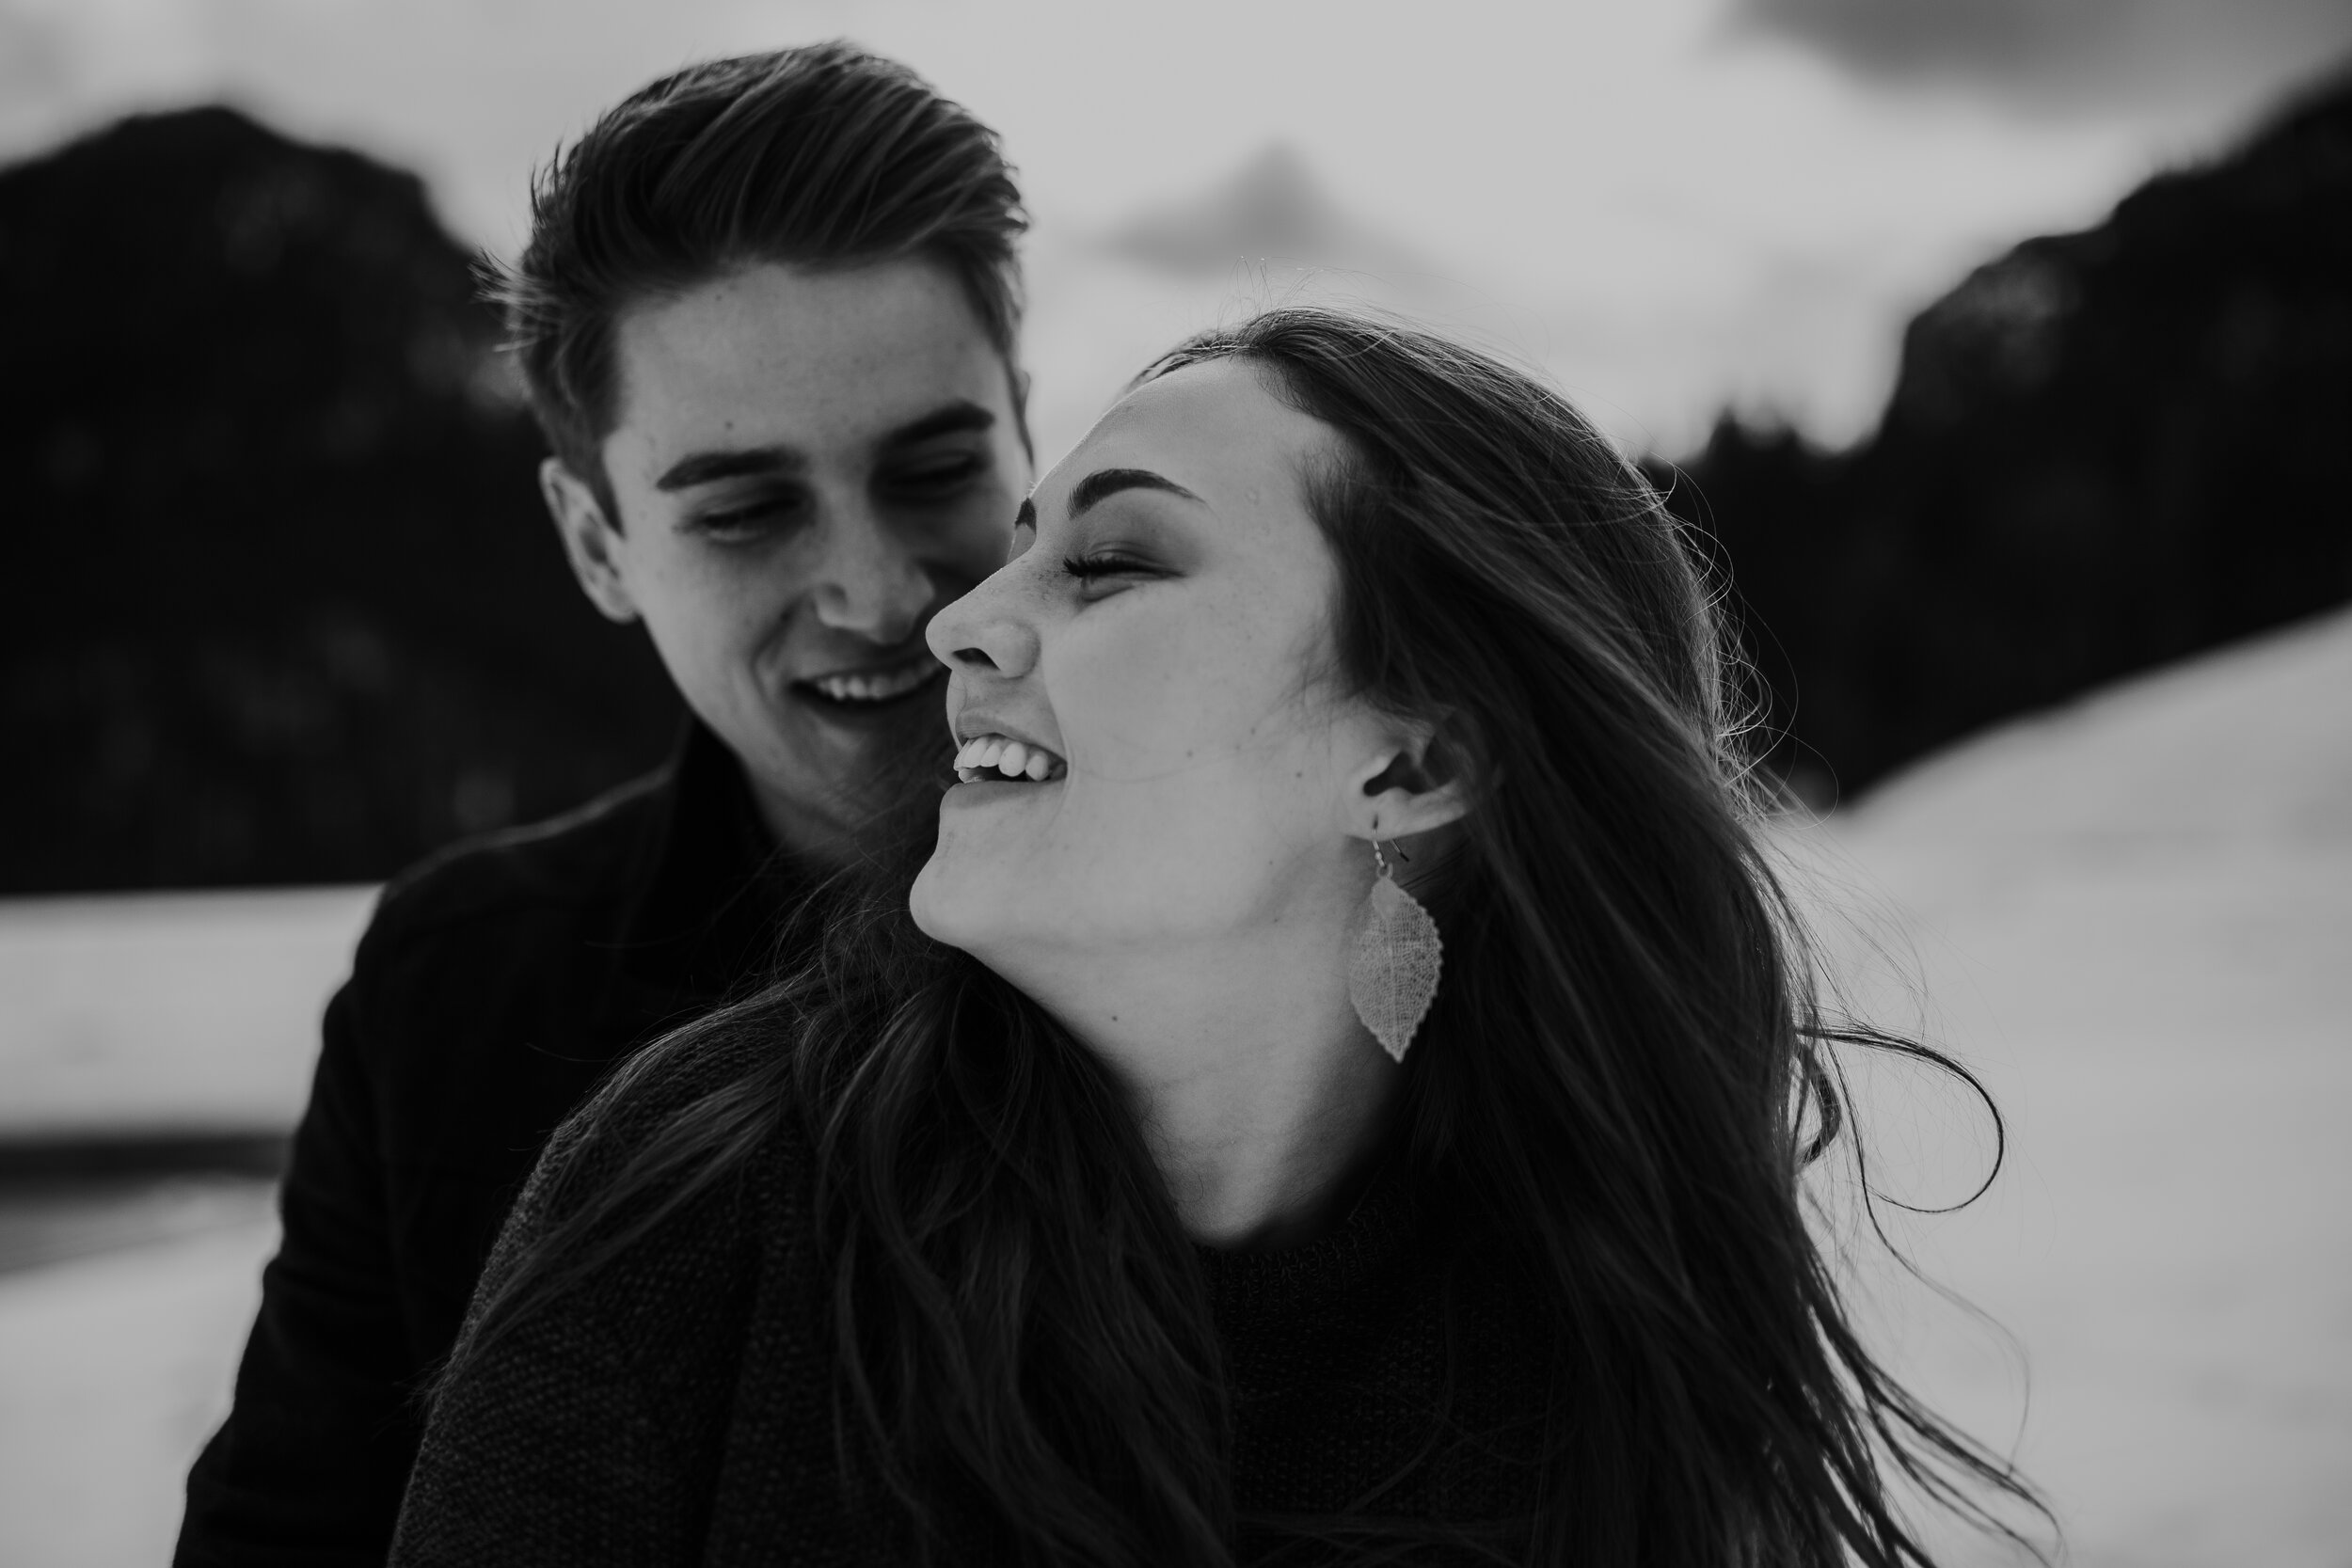 Snowy winter mountain engagements windy hair pine trees laughing couple shoot #coupleshoot #utahphotographer #weddingphotographer #engagements #engagementshoot #winterengagements black and white